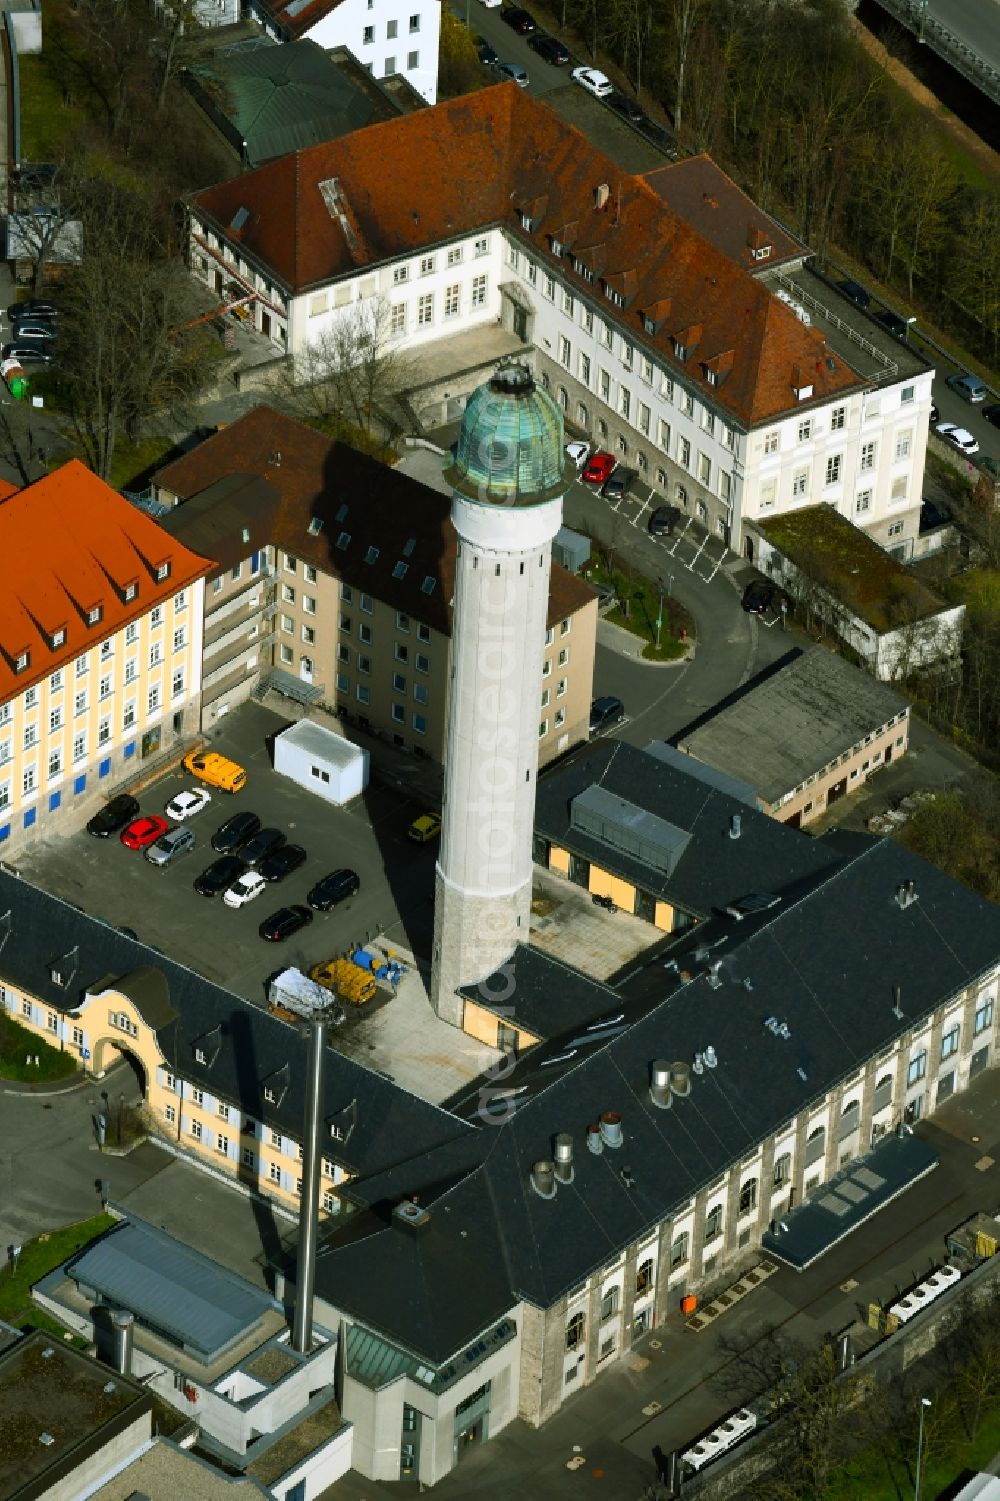 Würzburg from the bird's eye view: Fireplace - also known as a water tower or unit tower - of the university hospital in Wuerzburg in the state of Bavaria, Germany